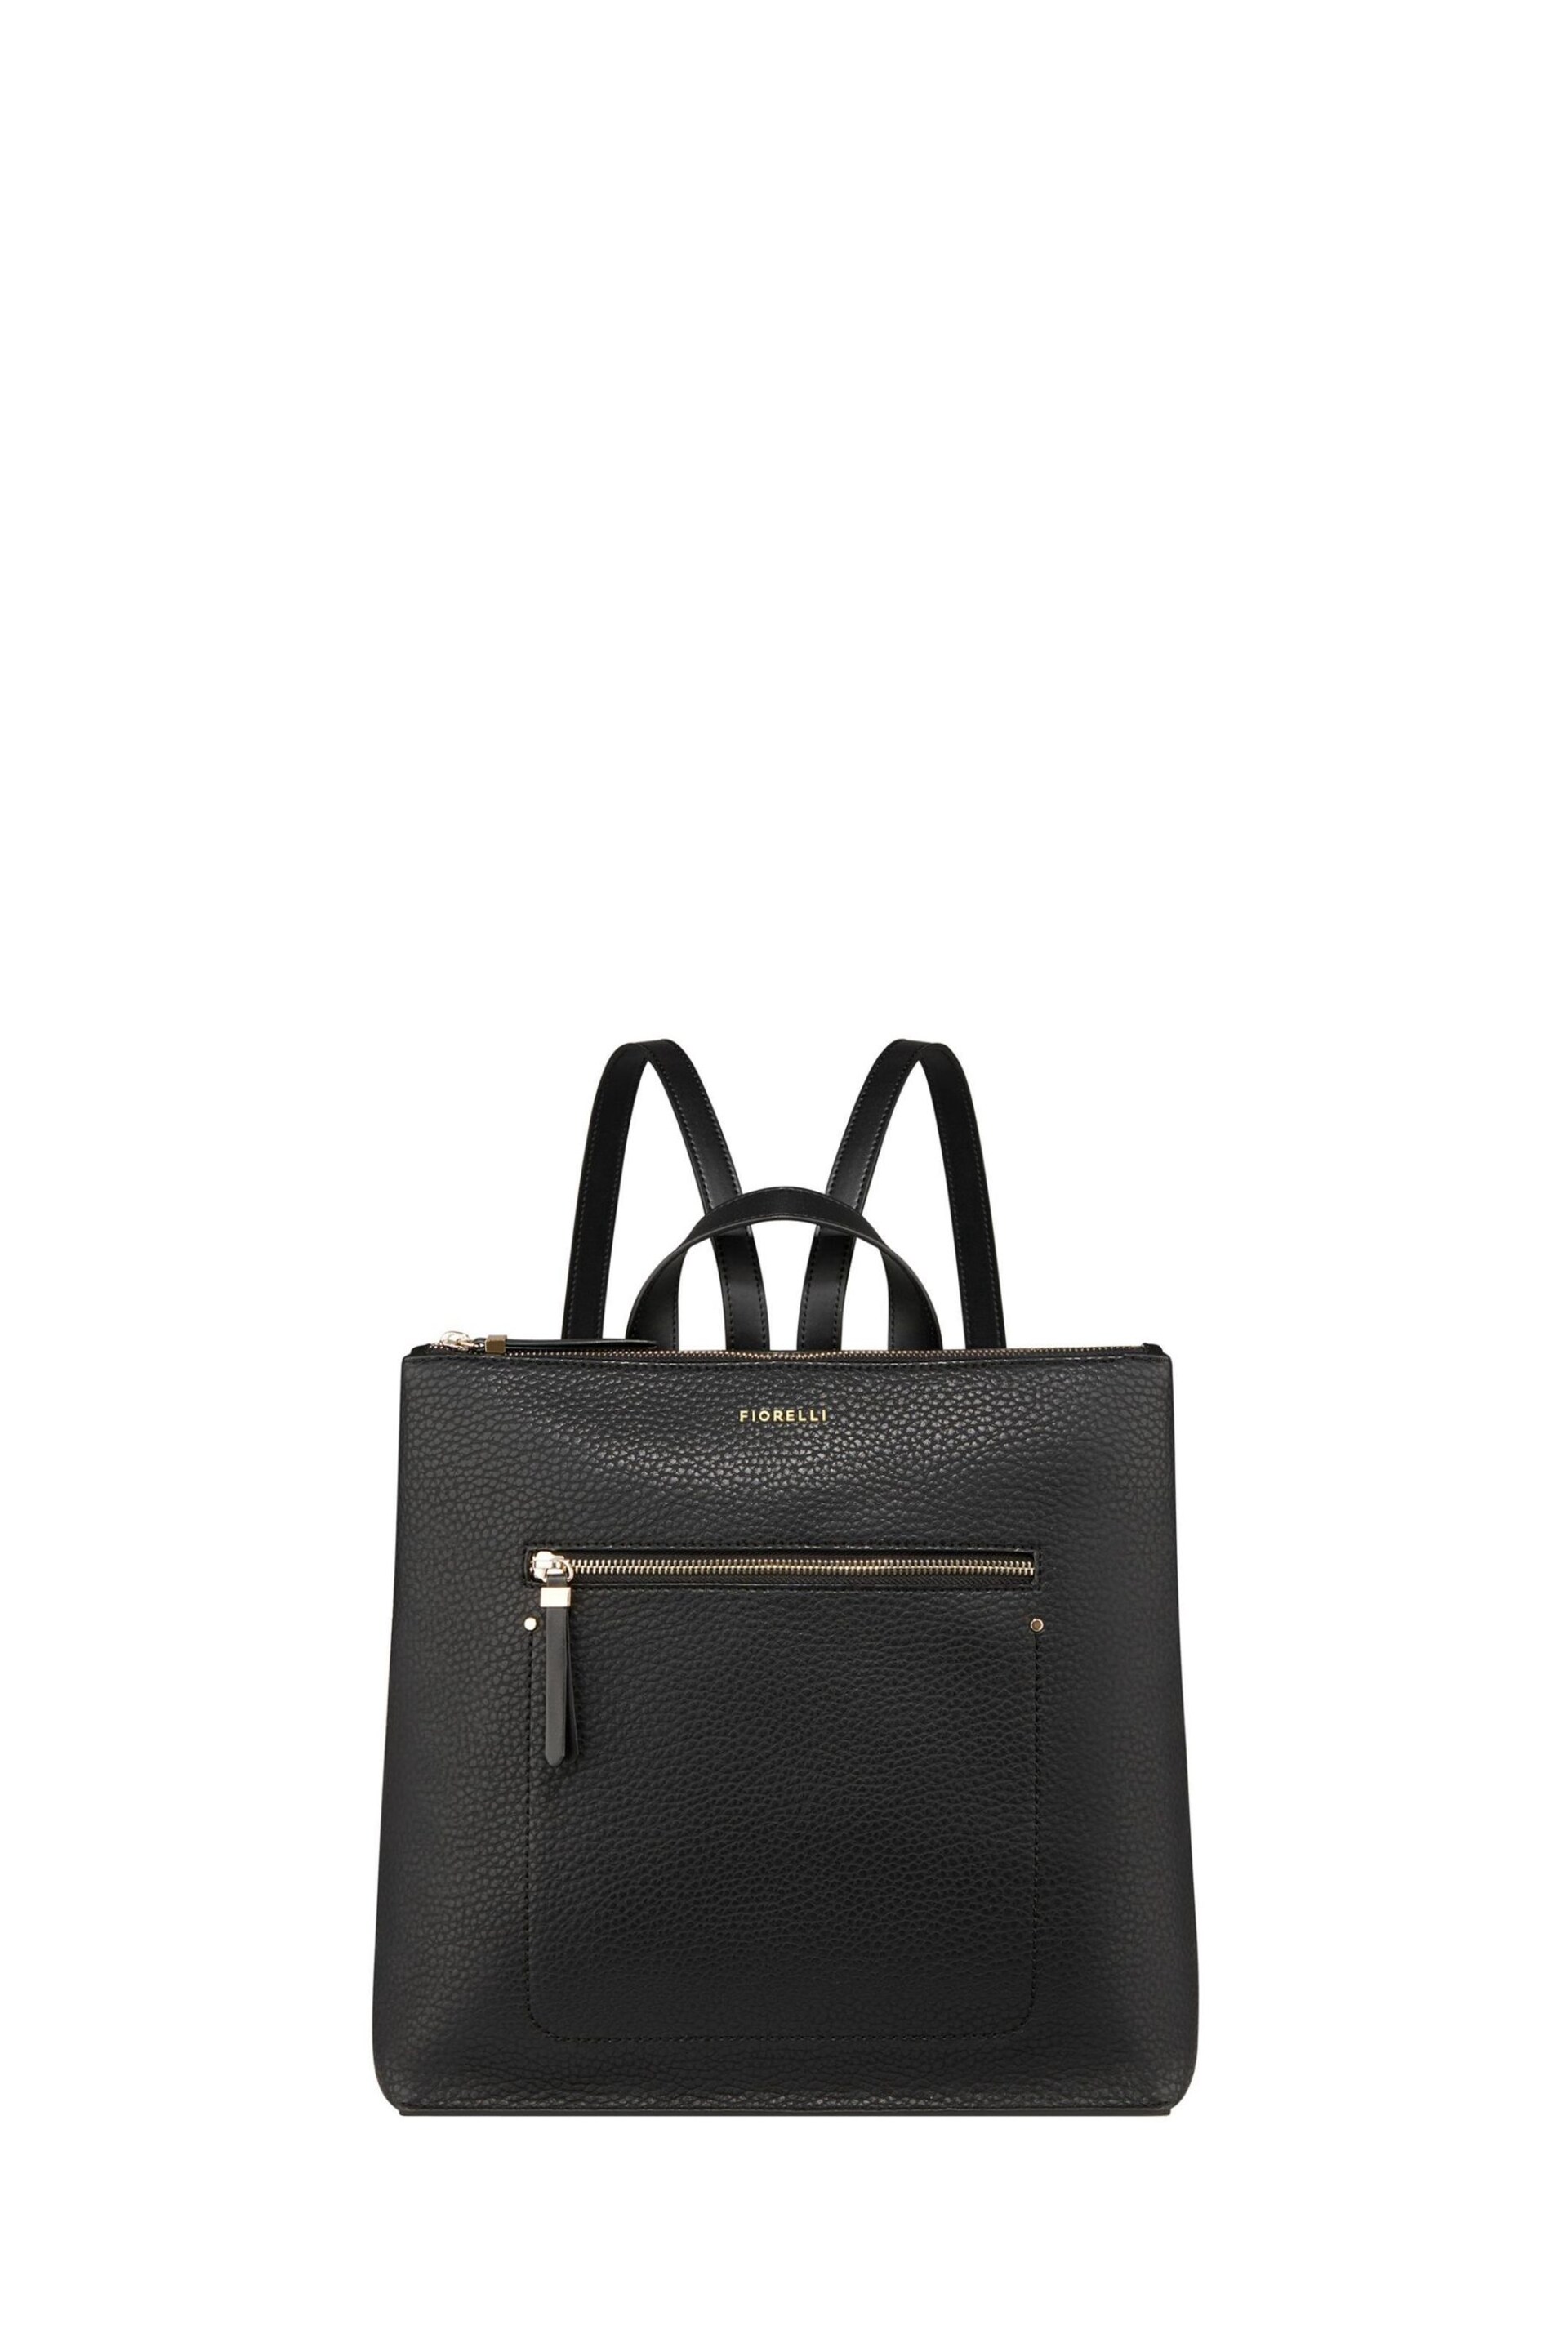 Fiorelli Finley Large Backpack - Image 1 of 8